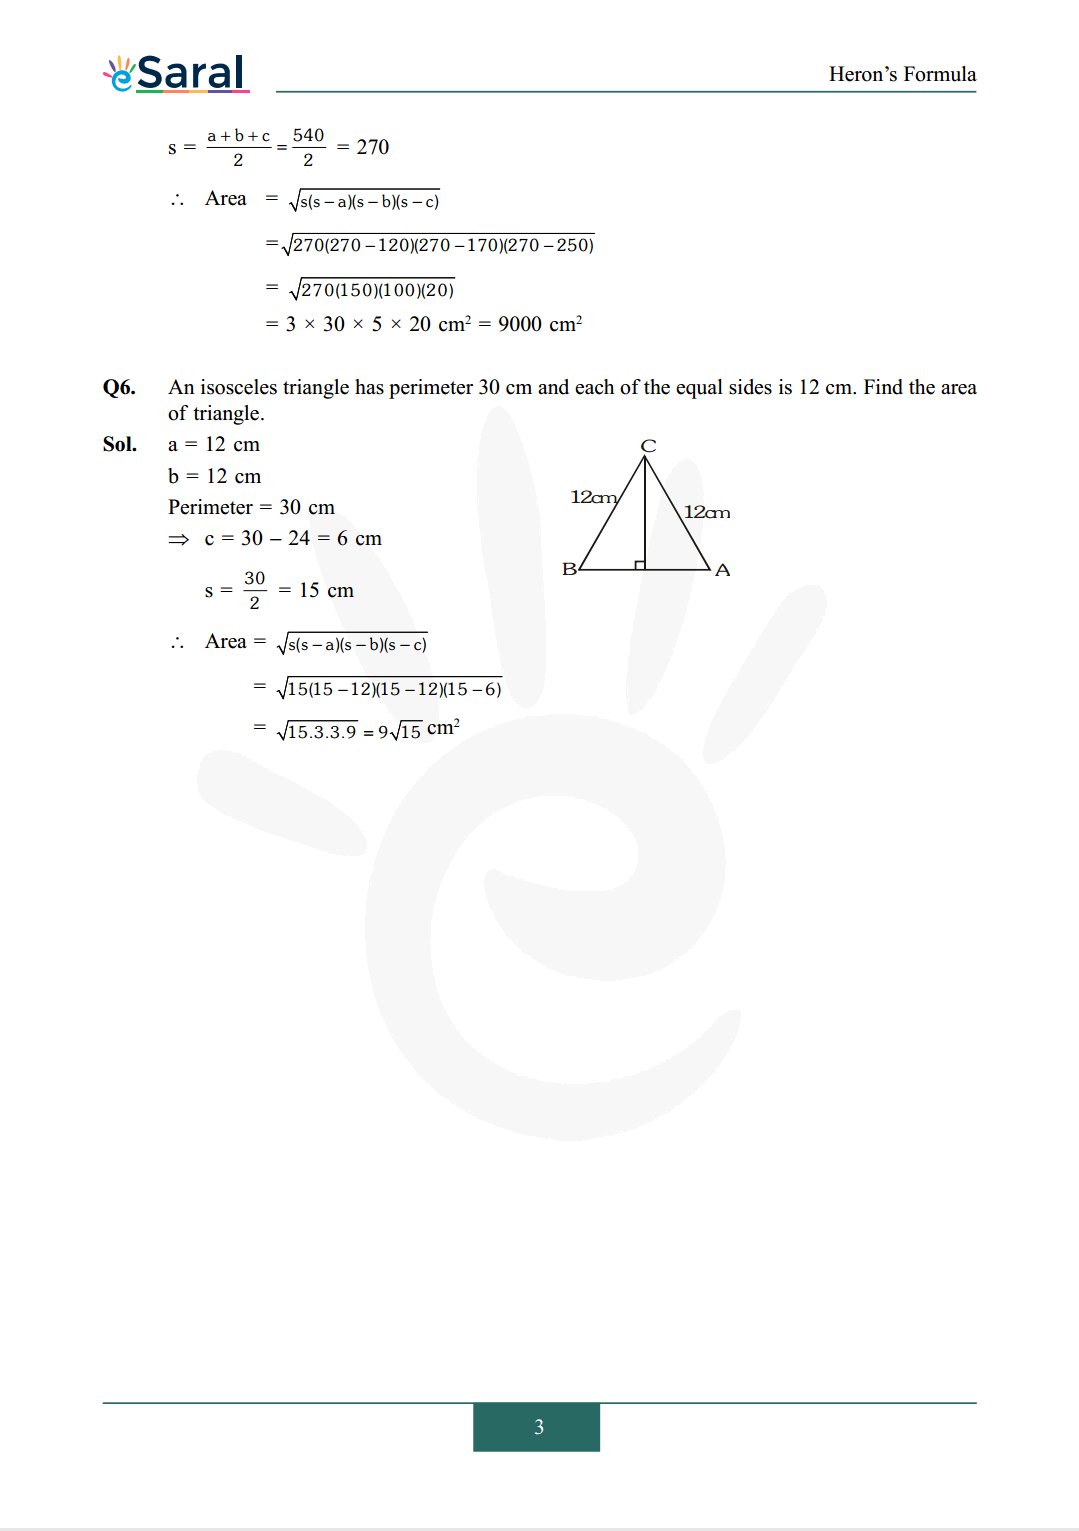 Class 9 maths chapter 12 exercise 12.1 solutions Image 3